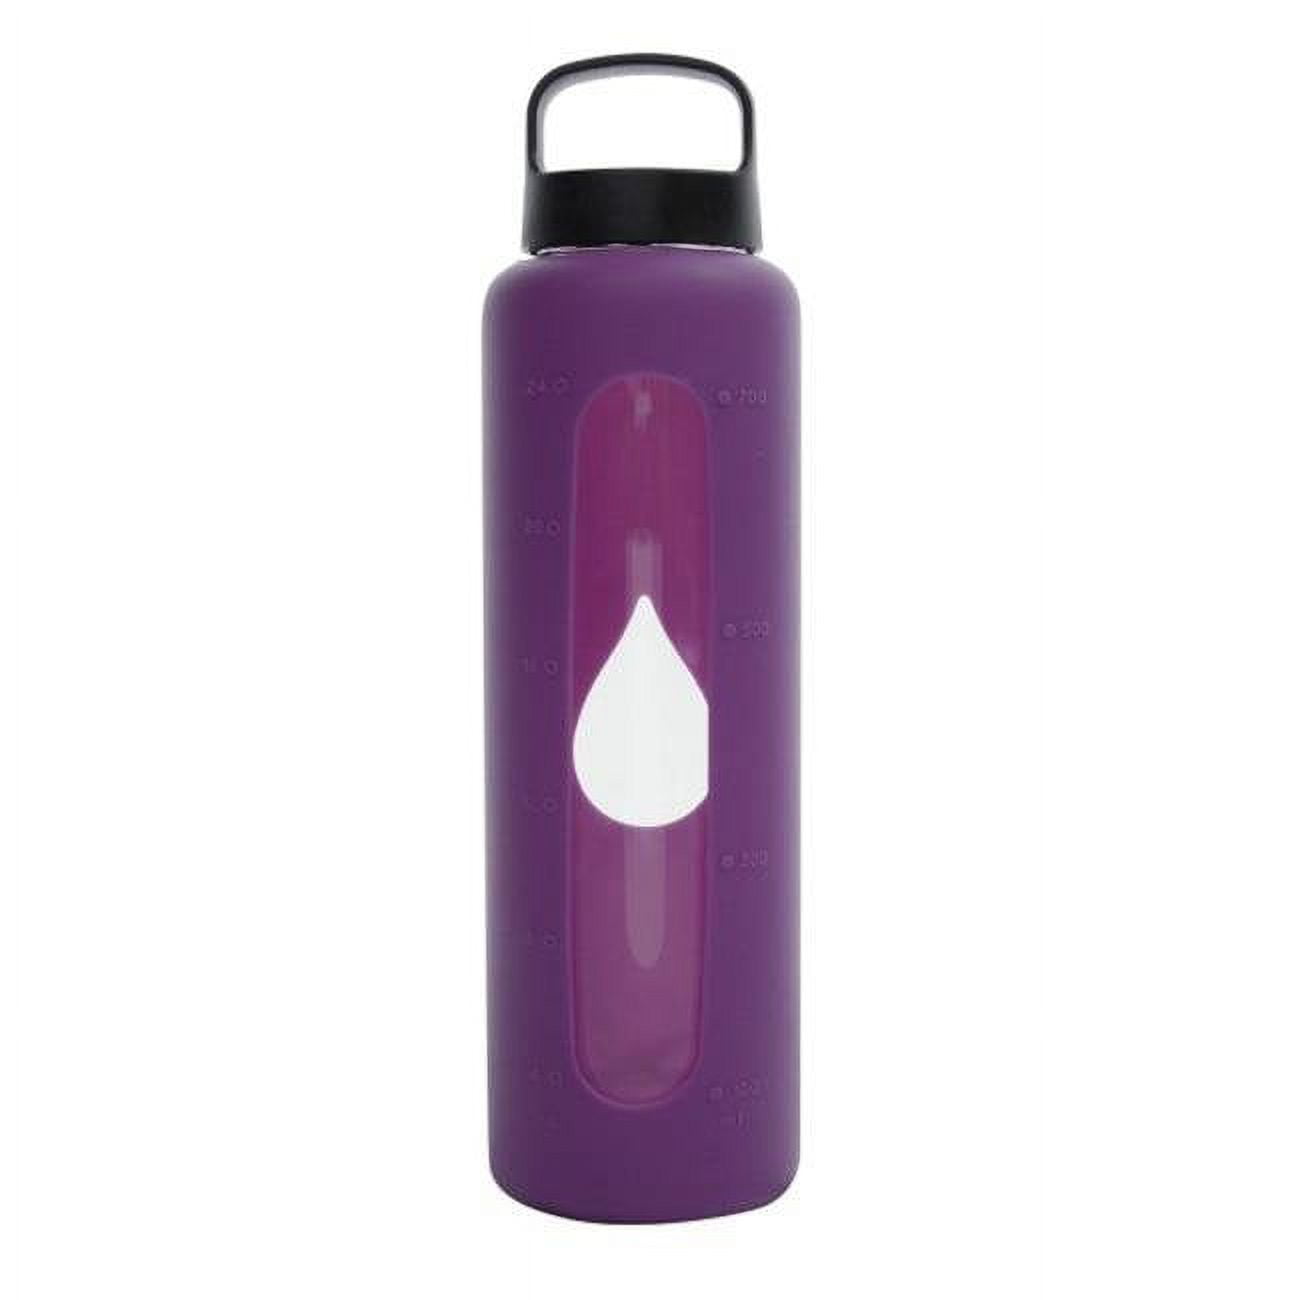 Picture of Bluewave Lifestyle GG150LC-Purple 750ml Reusable Glass Water Bottle With Loop Cap and Free Silicone Sleeve - Iris